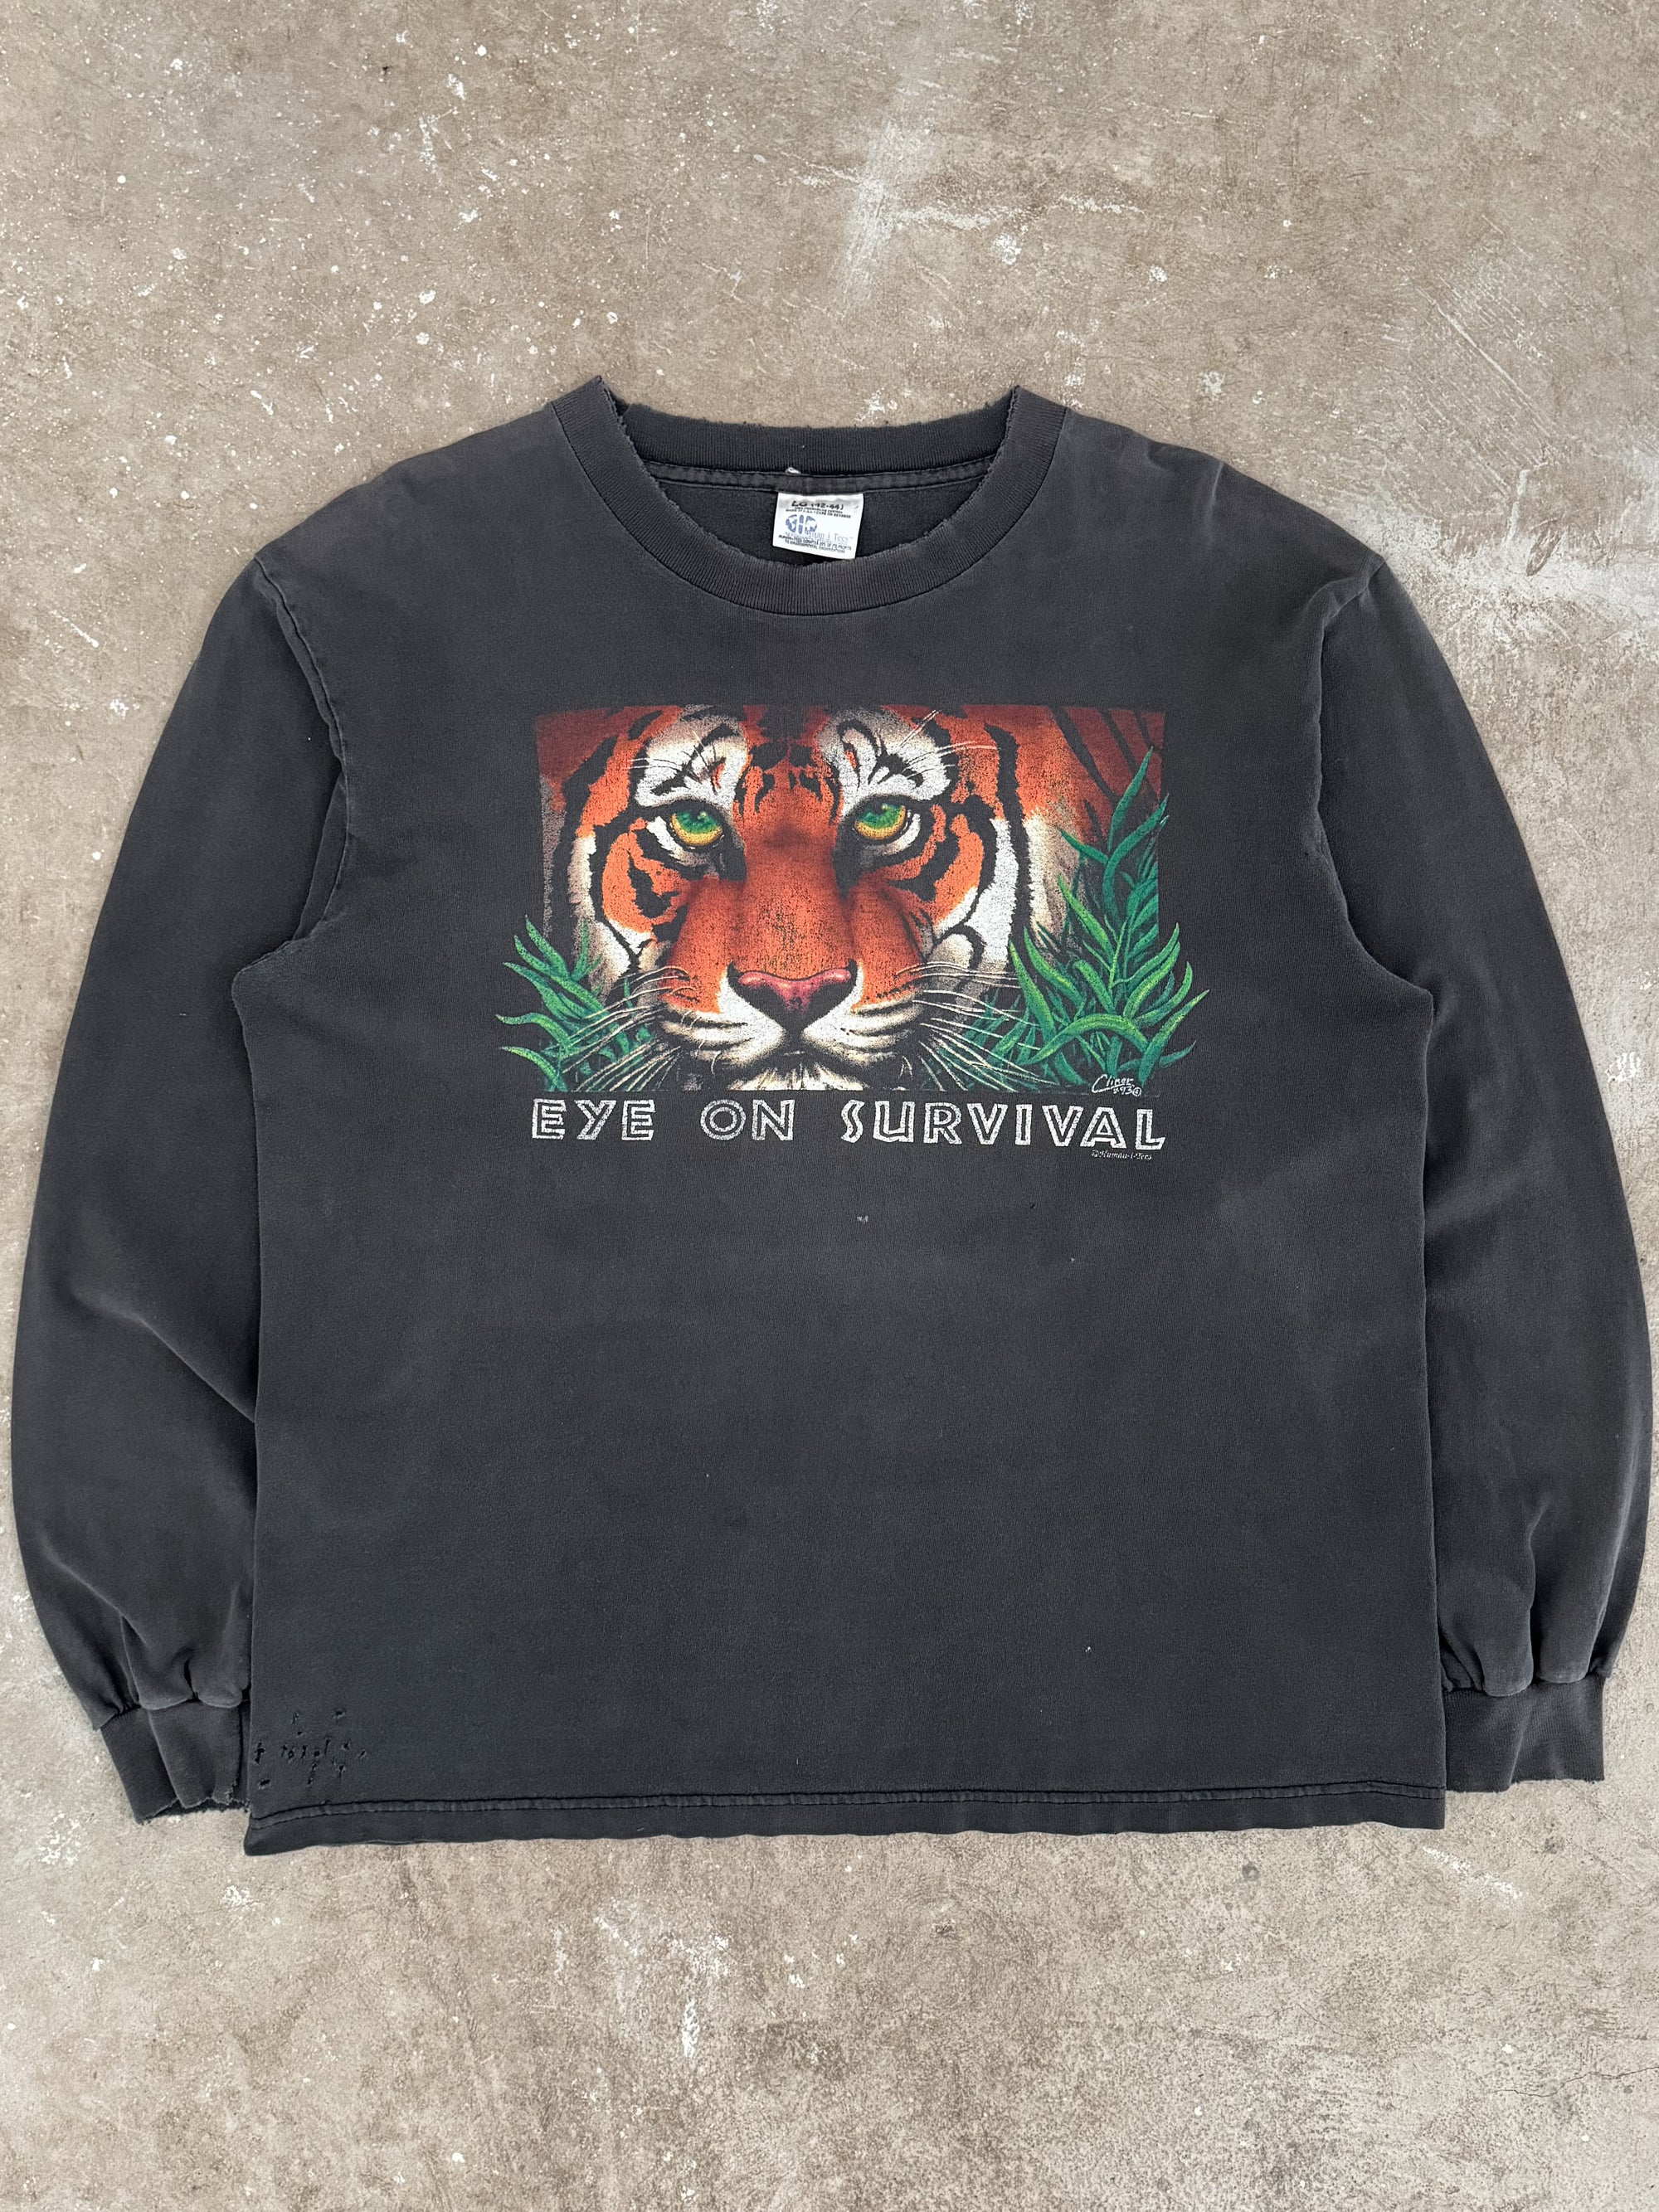 1990s "Eye on Survival" Distressed Faded Long Sleeve Tee (L)